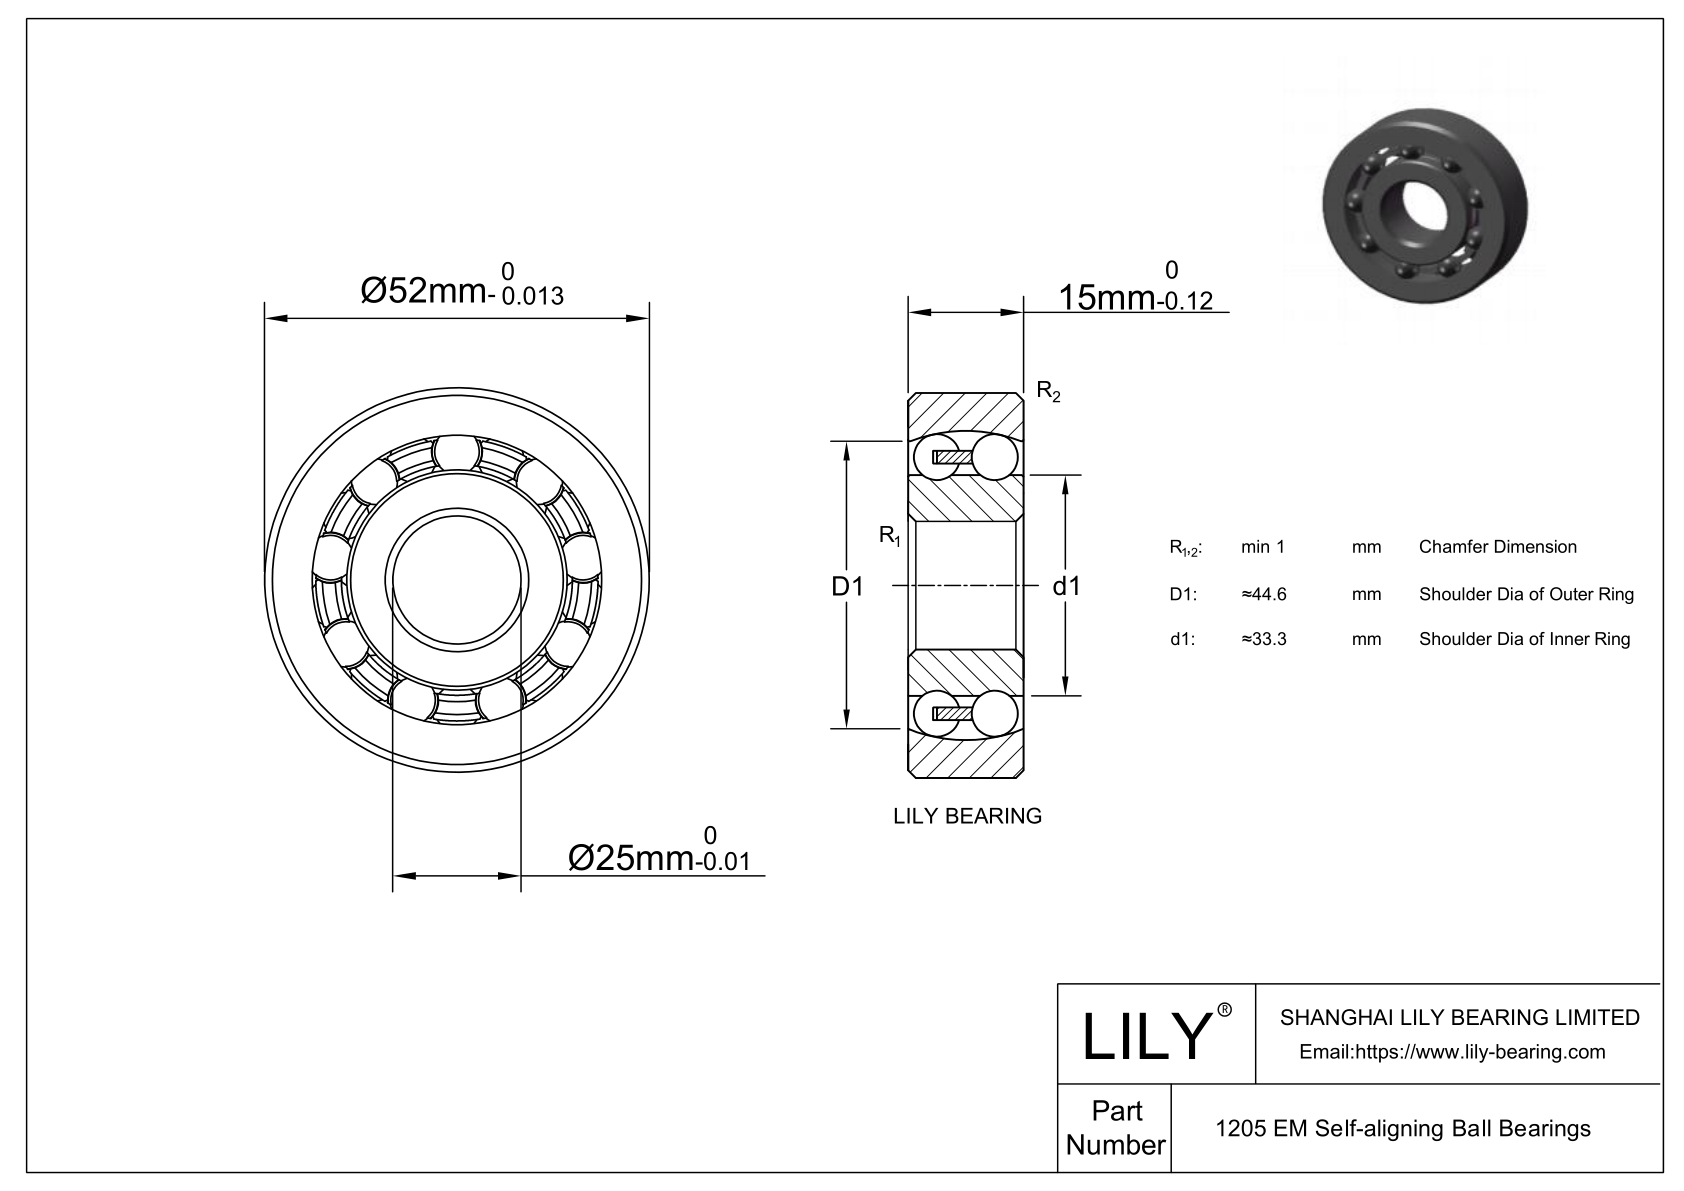 S1205 EM Stainless Steel Self Aligning Ball Bearings cad drawing